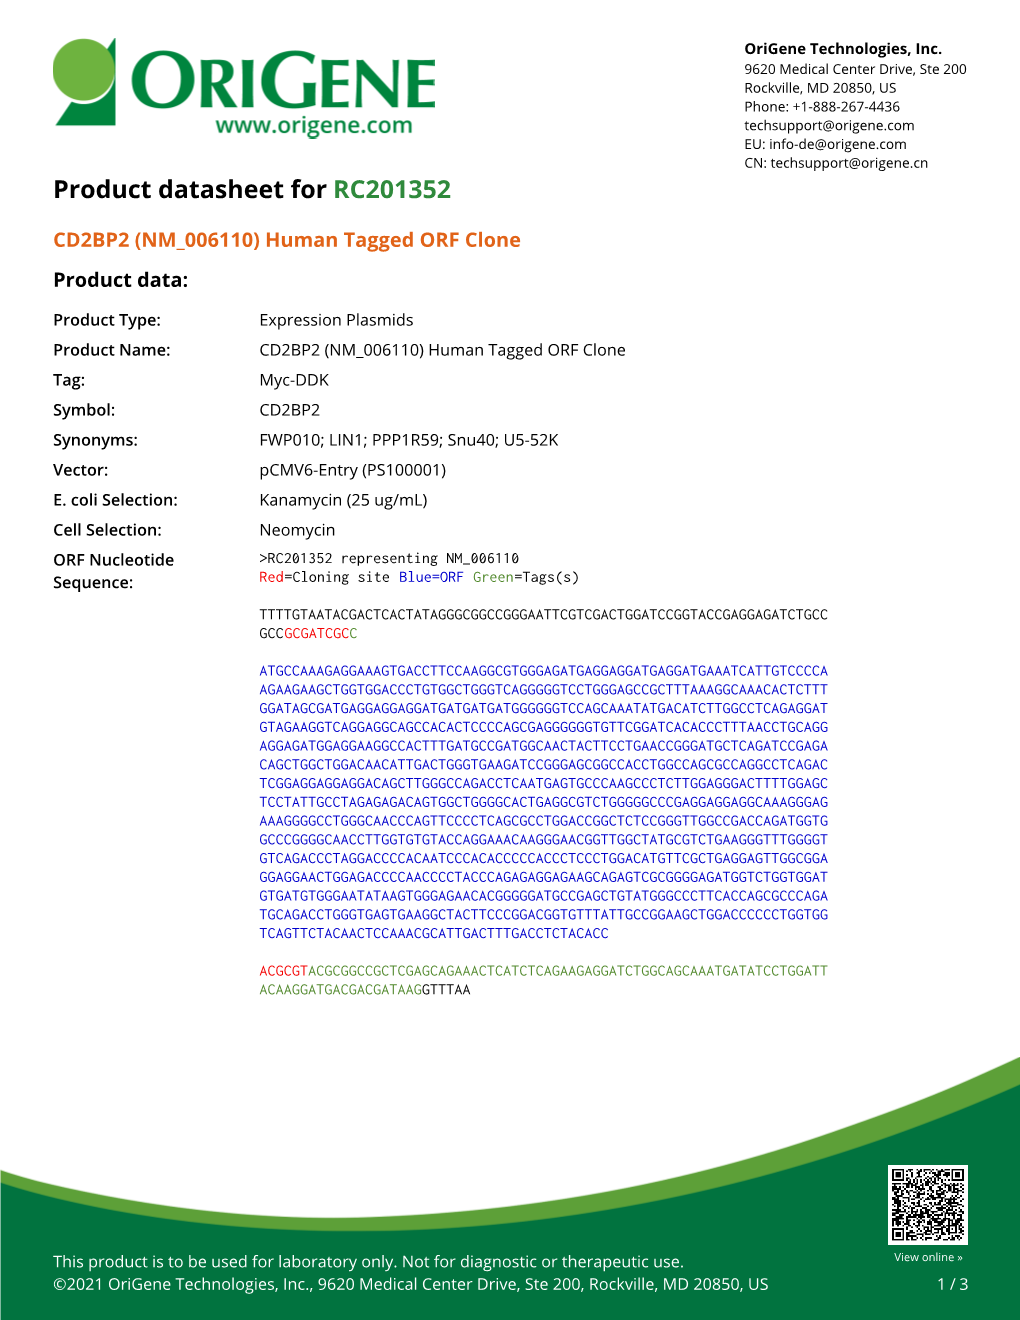 CD2BP2 (NM 006110) Human Tagged ORF Clone Product Data